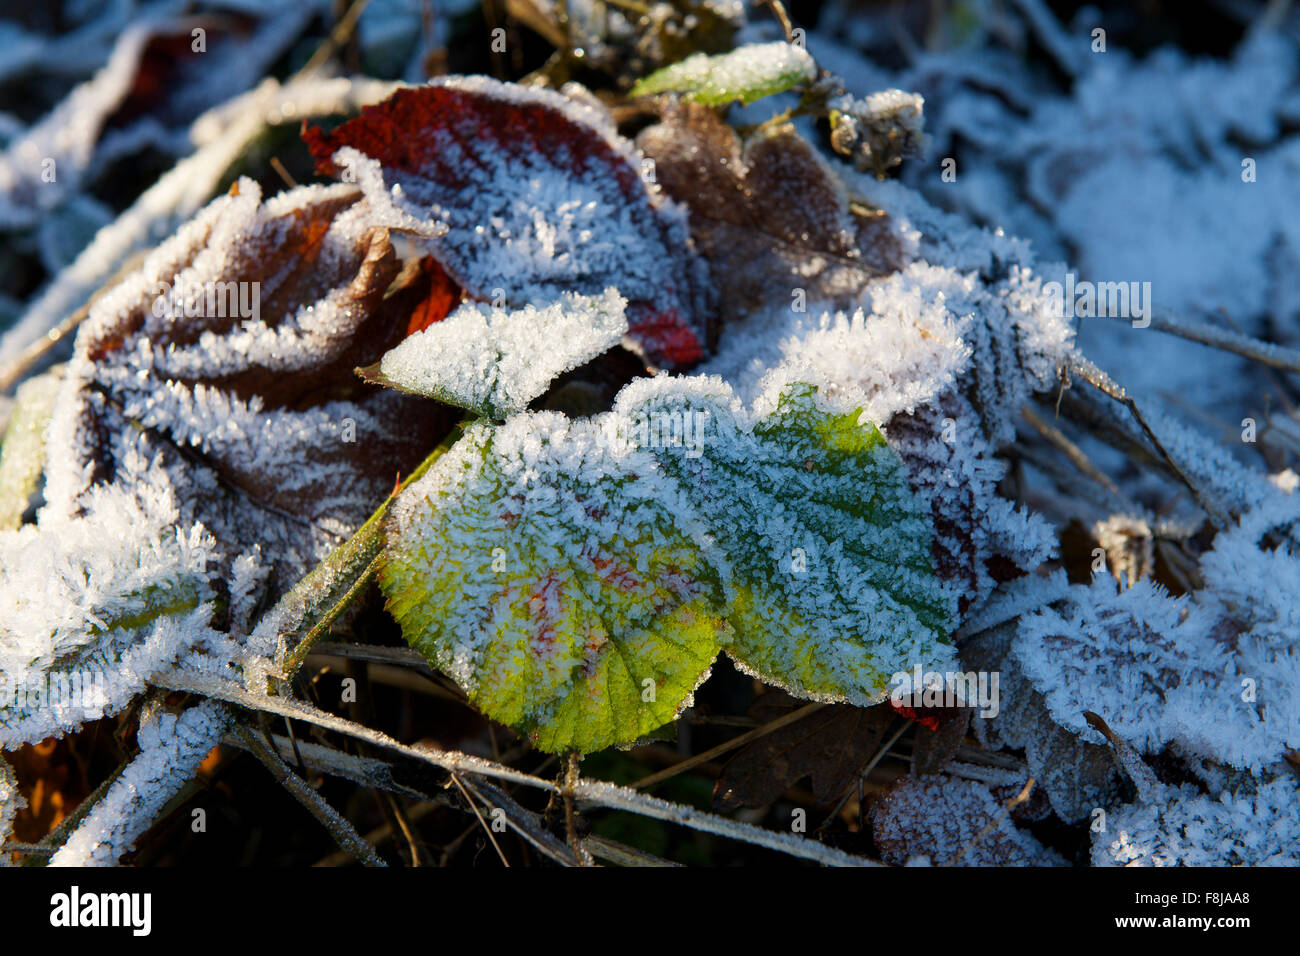 Frost on leaves lying on the ground in bright sunshine on a winters day. Stock Photo